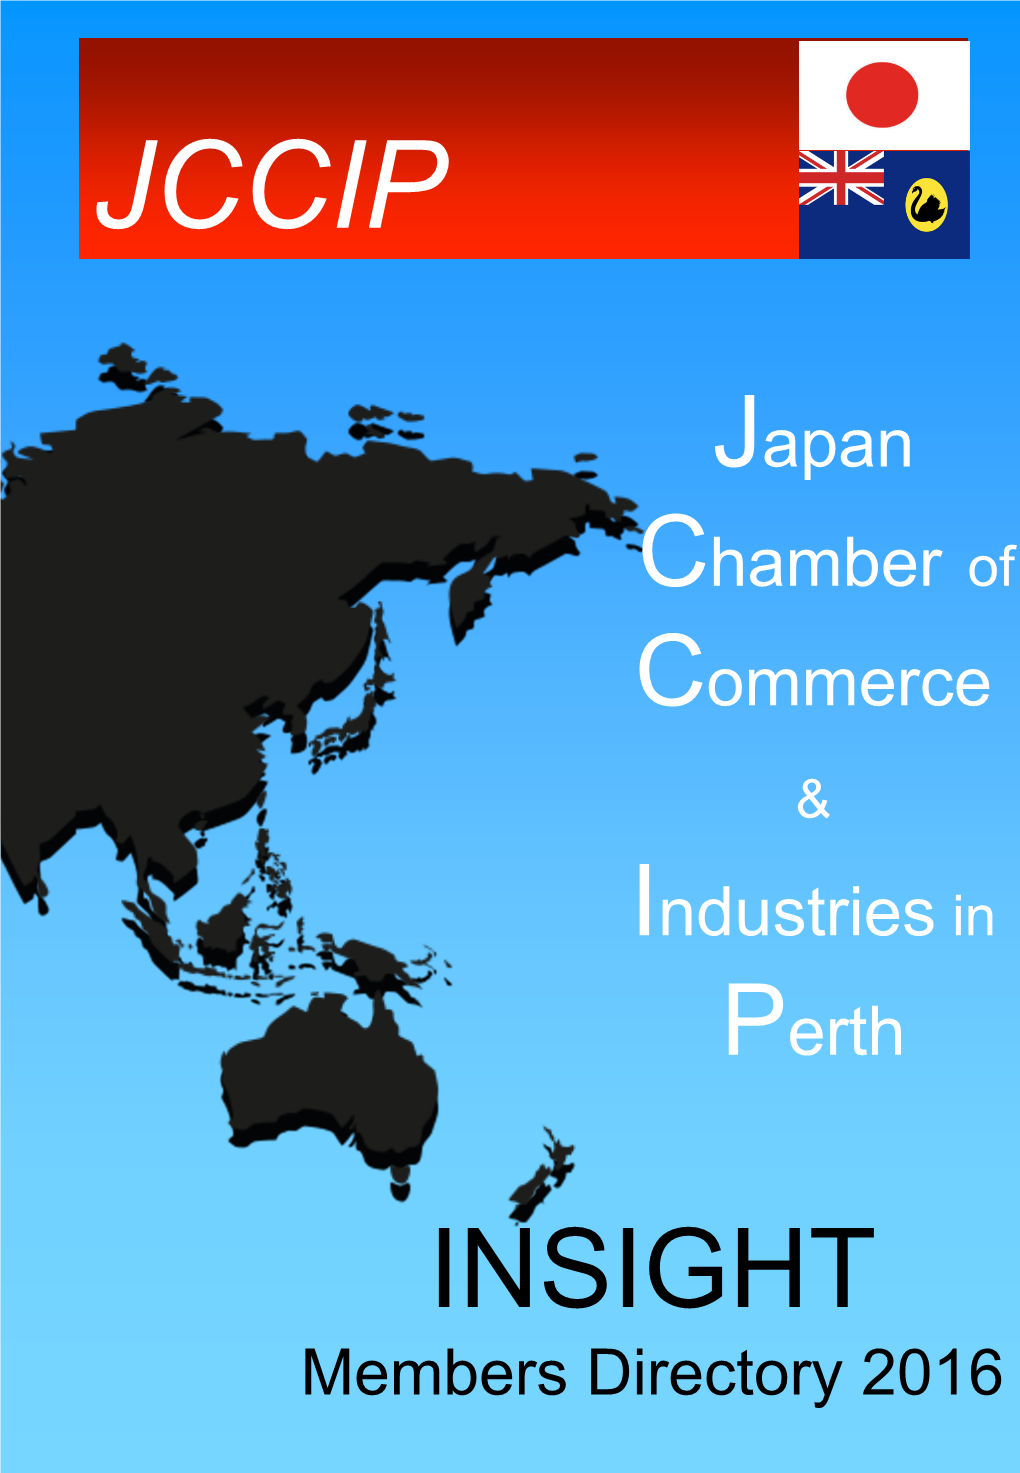 Industries in Perth